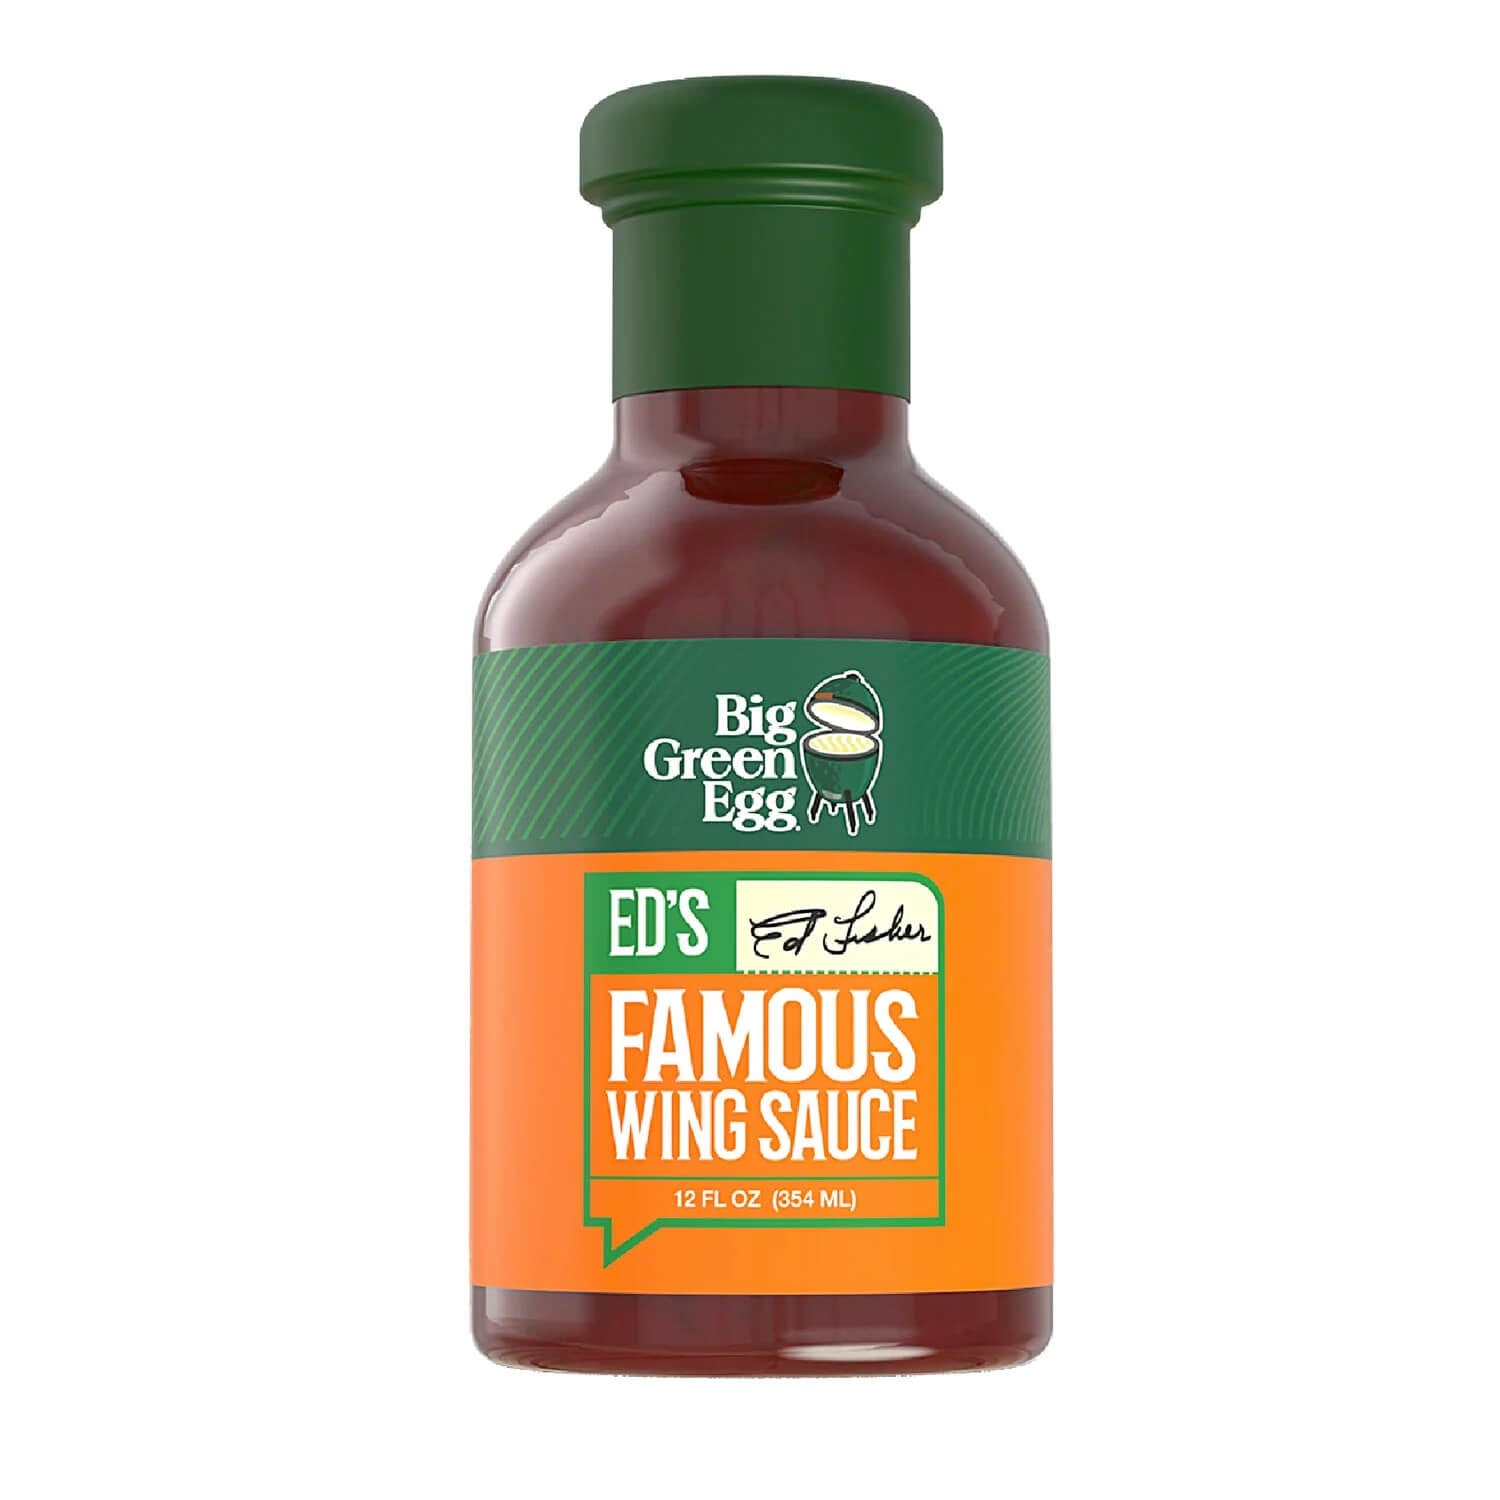 Ed Fisher’s Famous Wing Sauce